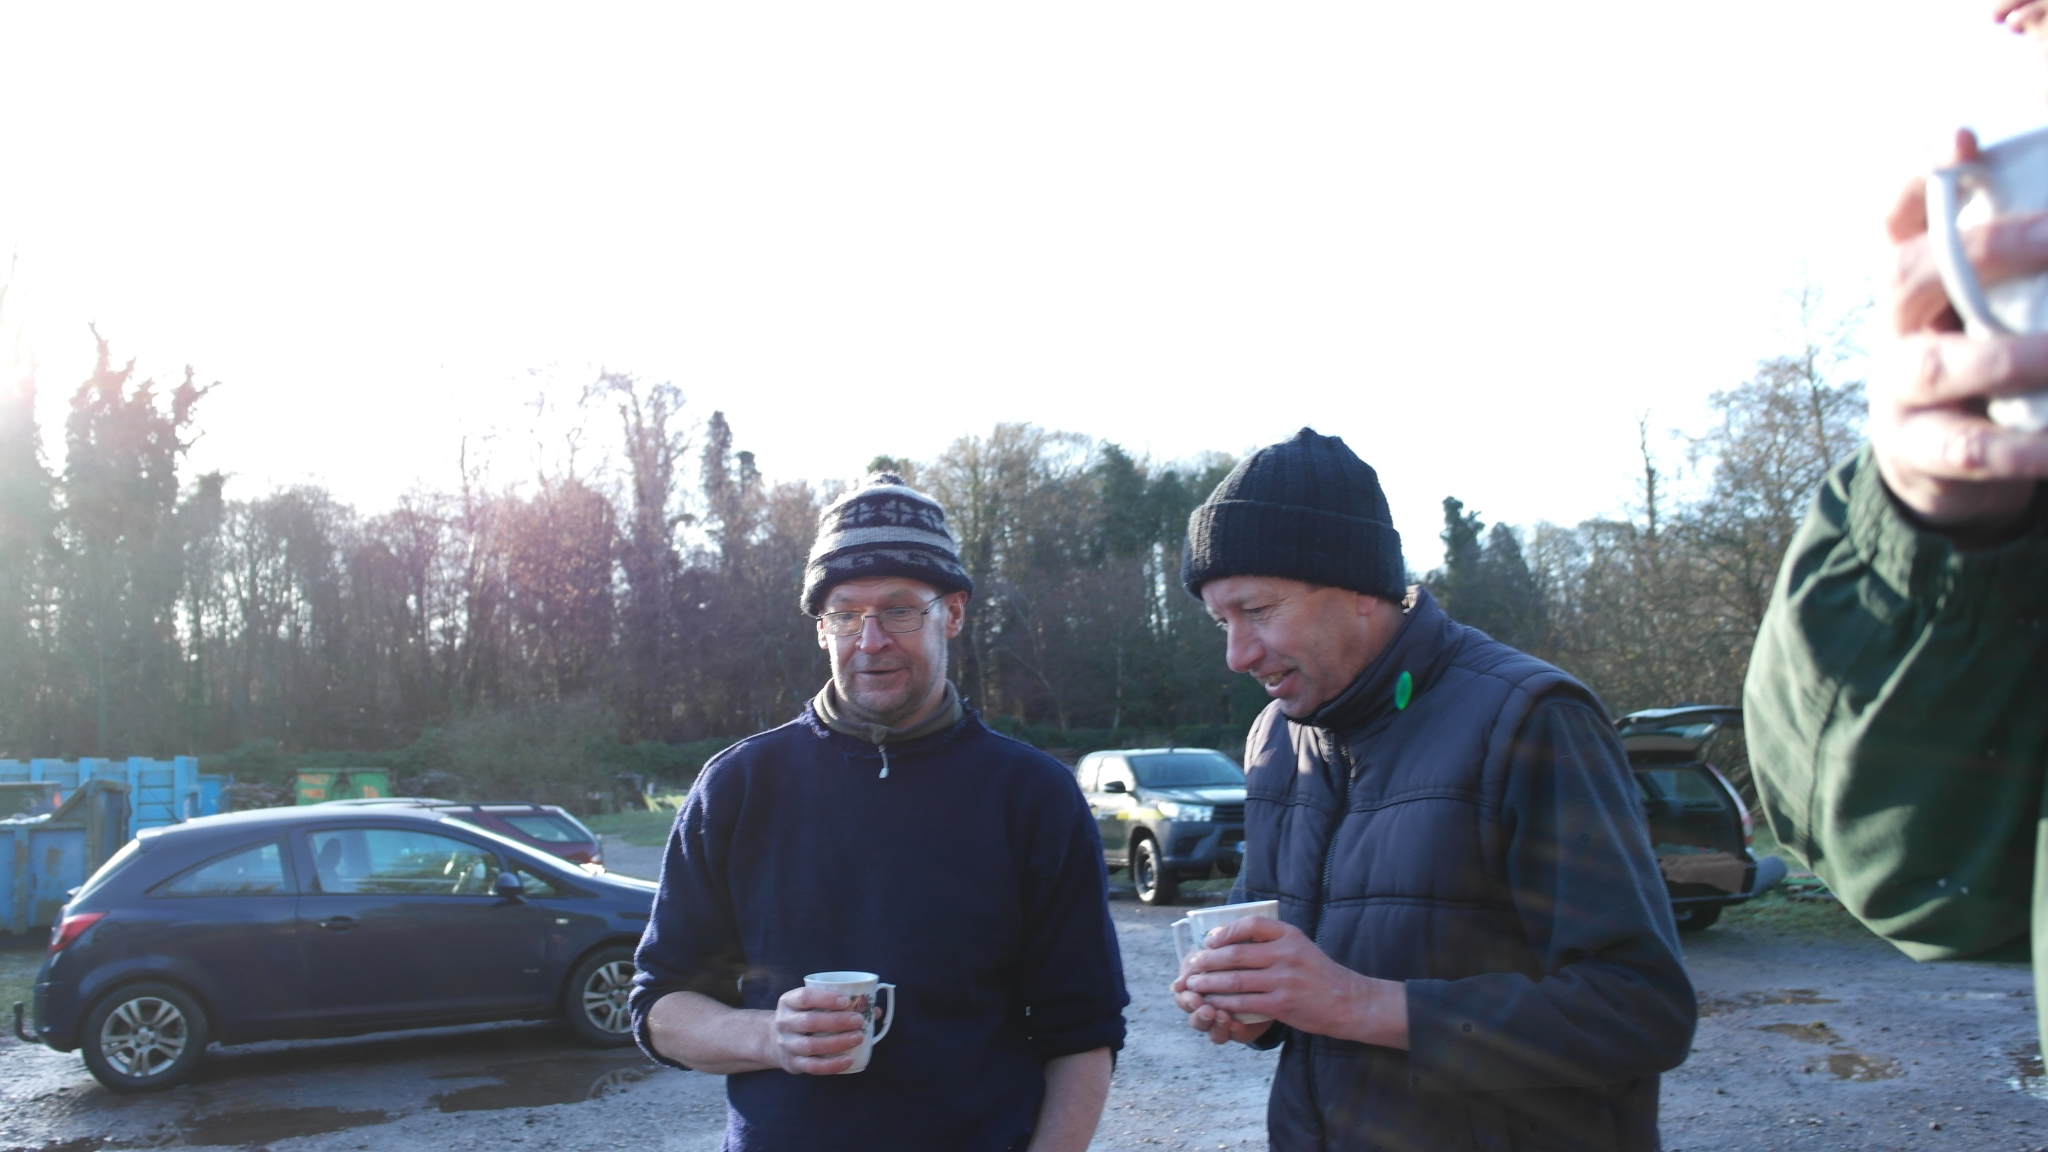 A photo from the FoTF Conservation Event - December 2018 - Constructing Mink Rafts at Santon Downham Workshops : Some of the team take a well earned coffee break